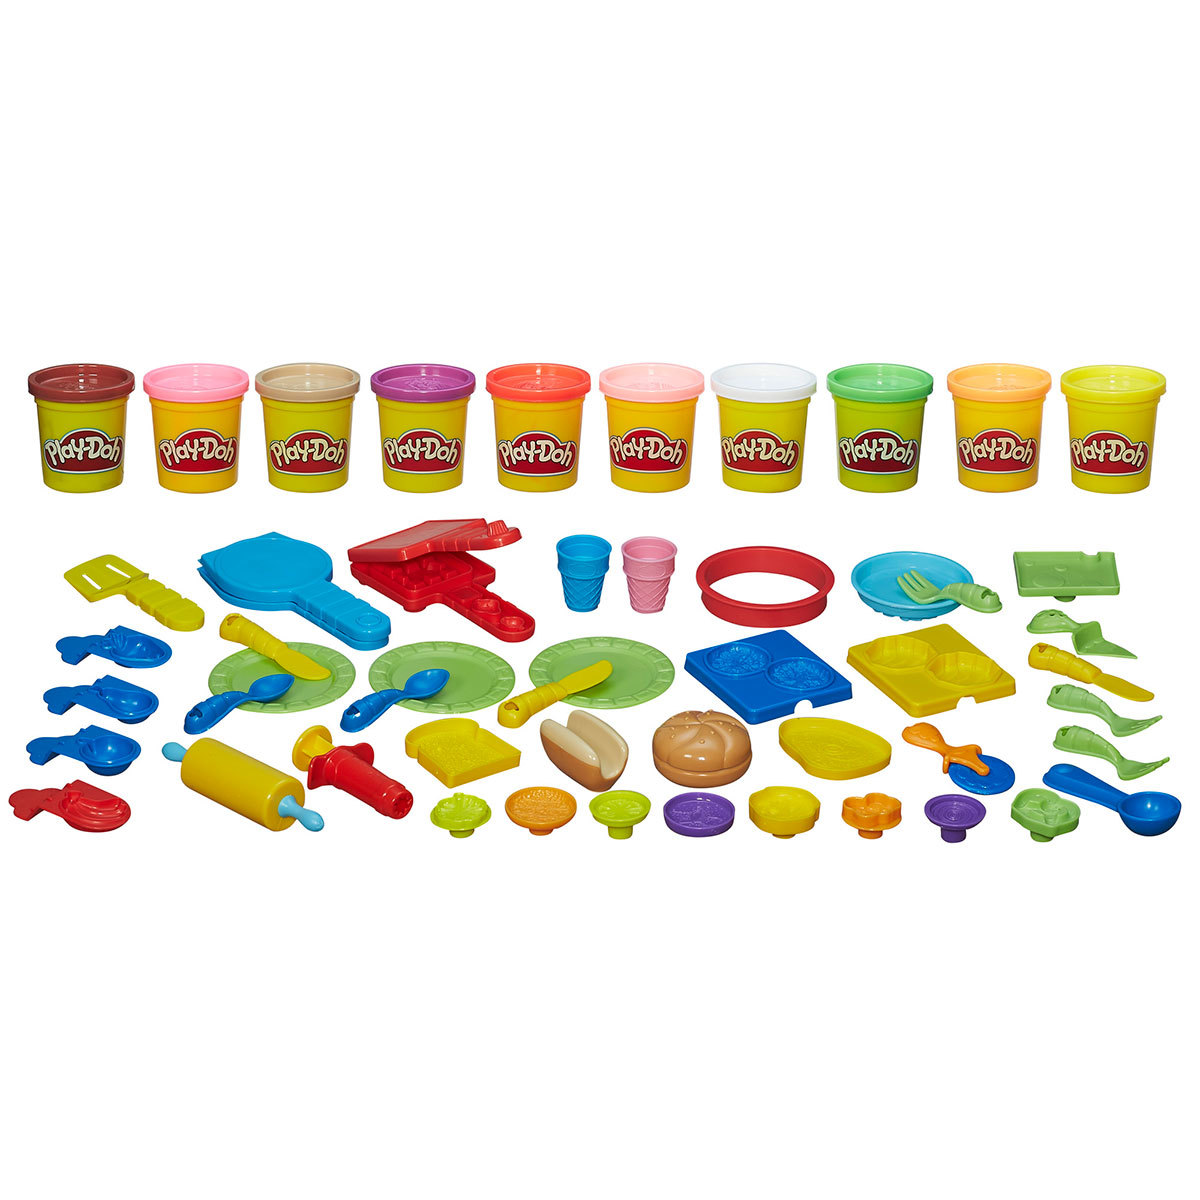 Play-Doh Chef Supreme Set With 40 Accessories + 10 Play-Doh Pots (3+ Years)